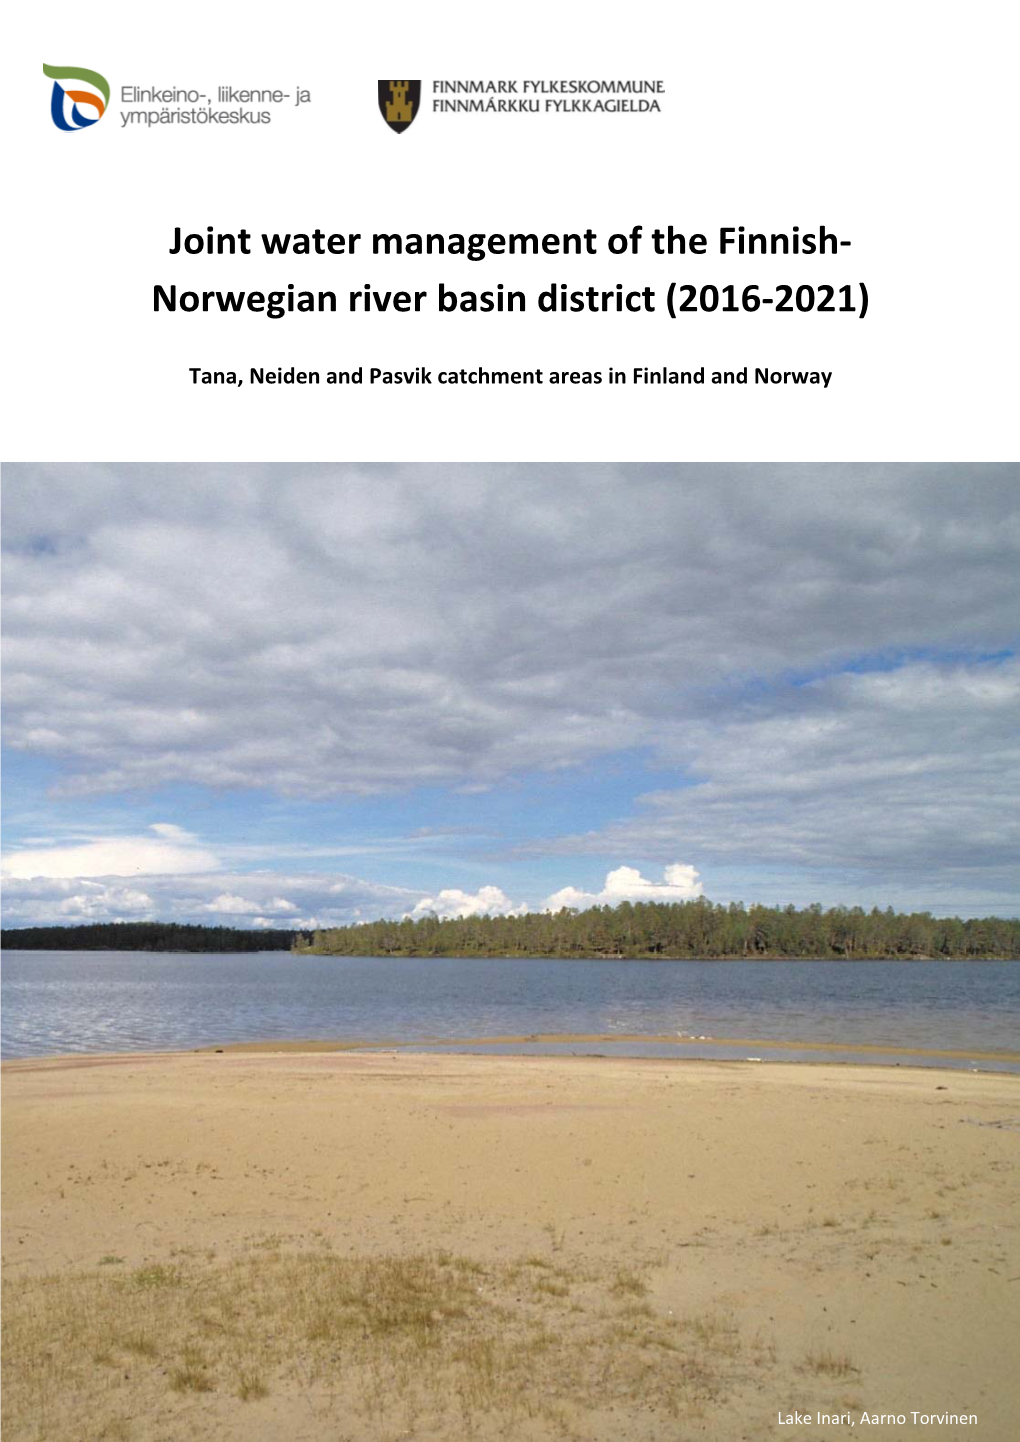 Joint Water Management of the Finnish- Norwegian River Basin District